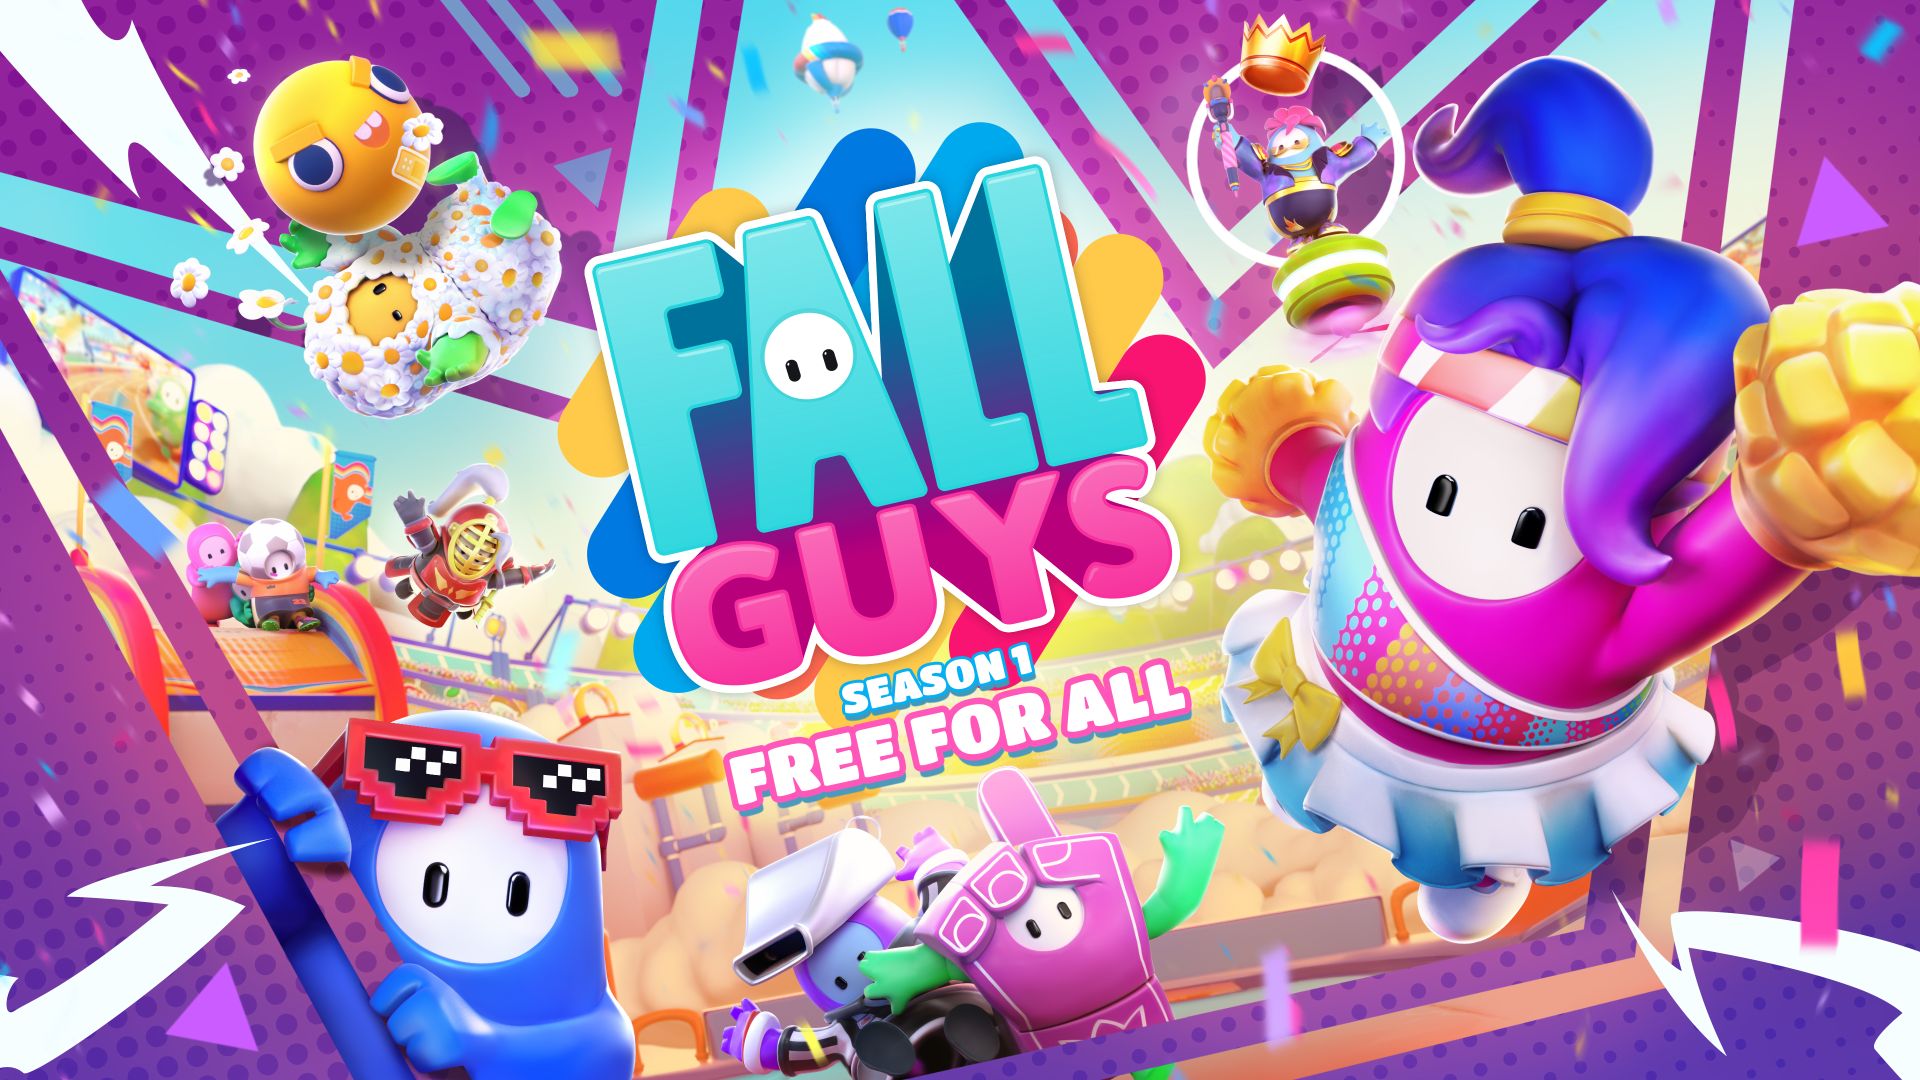 Fall Guys Launches for free on June 21 Across All Platforms